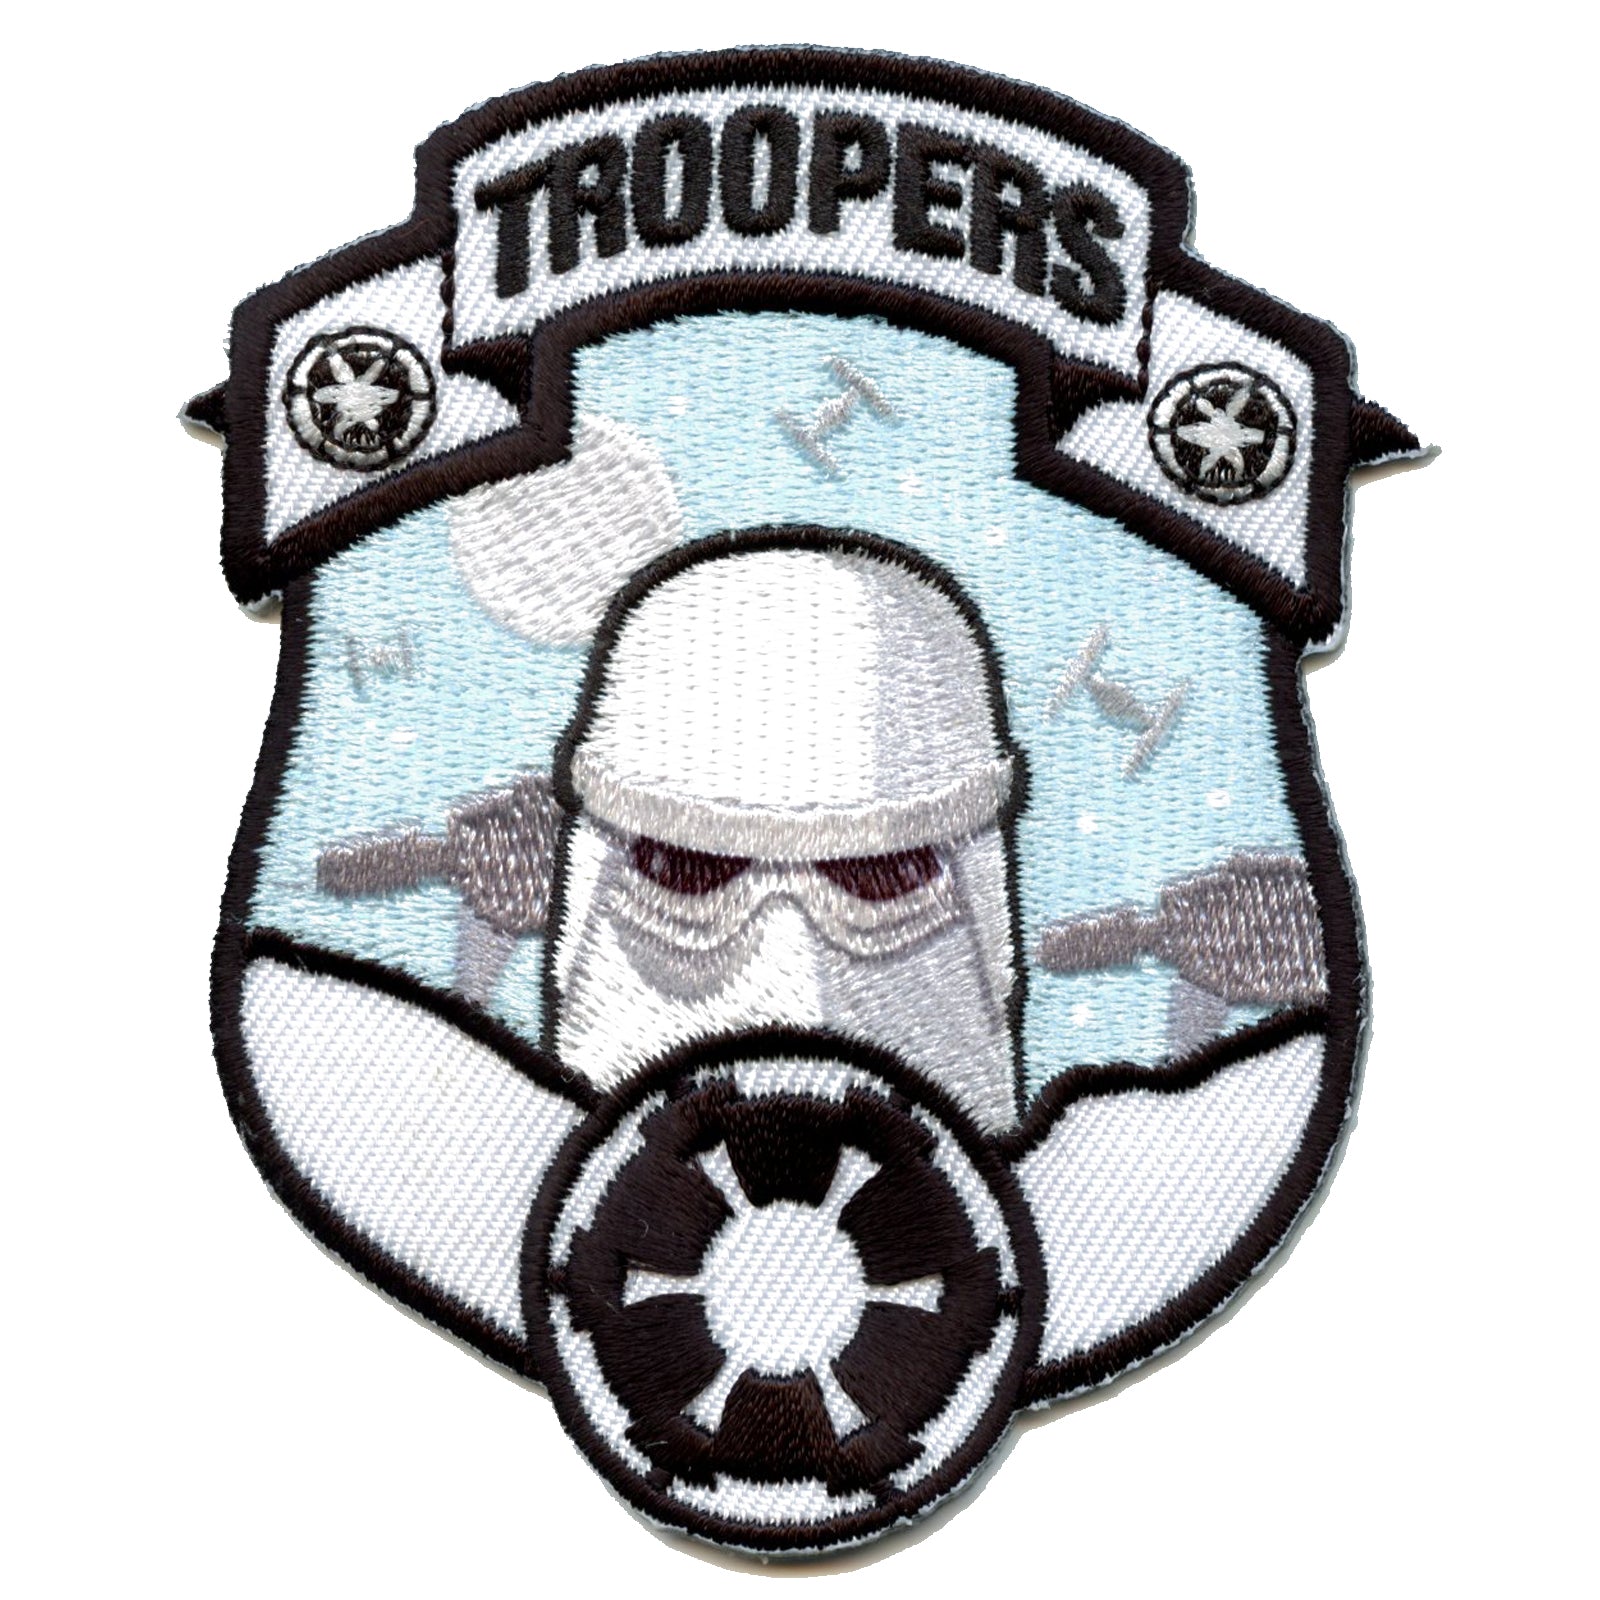 Official Star Wars Storm "Troopers" Embroidered Iron On Patch 